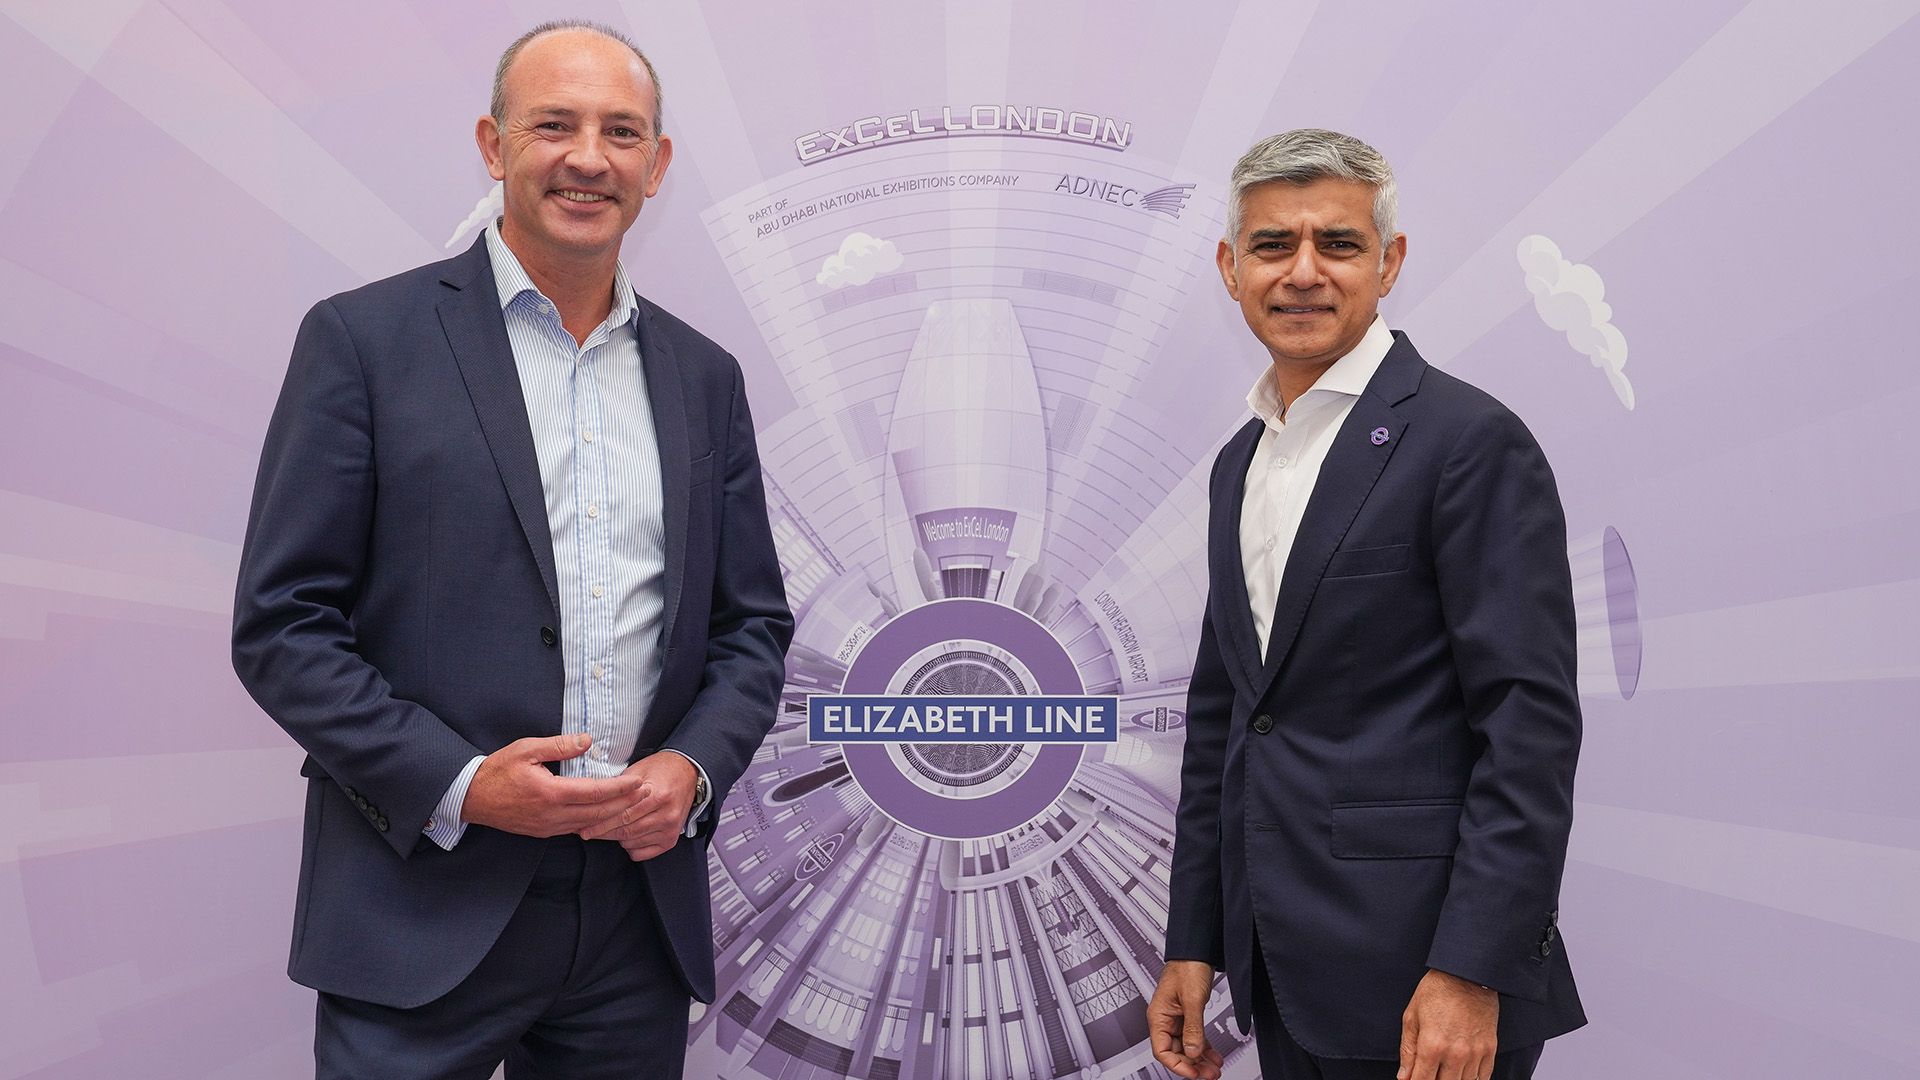 ELIZABETH LINE | Reducing journey times to ExCeL by up to two thirds